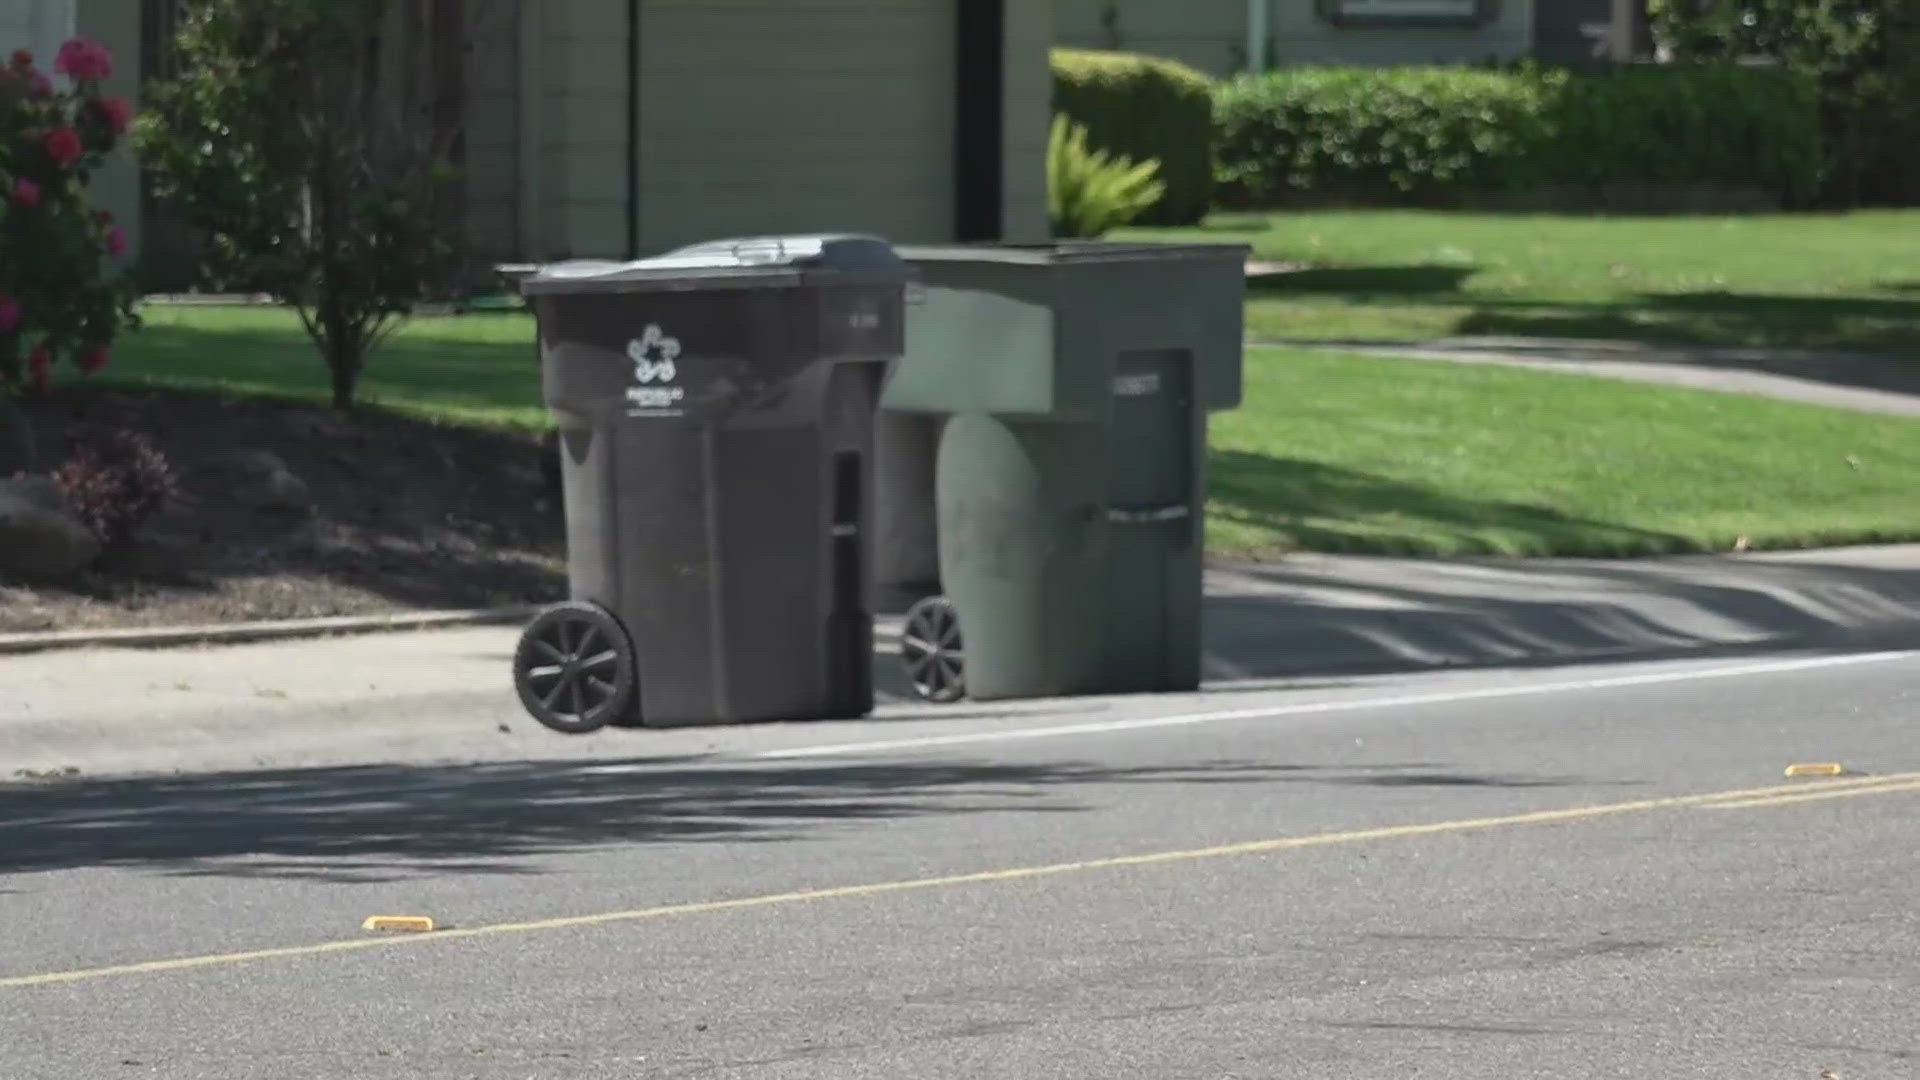 San Joaquin County officials work to address the disparity in trash service rates